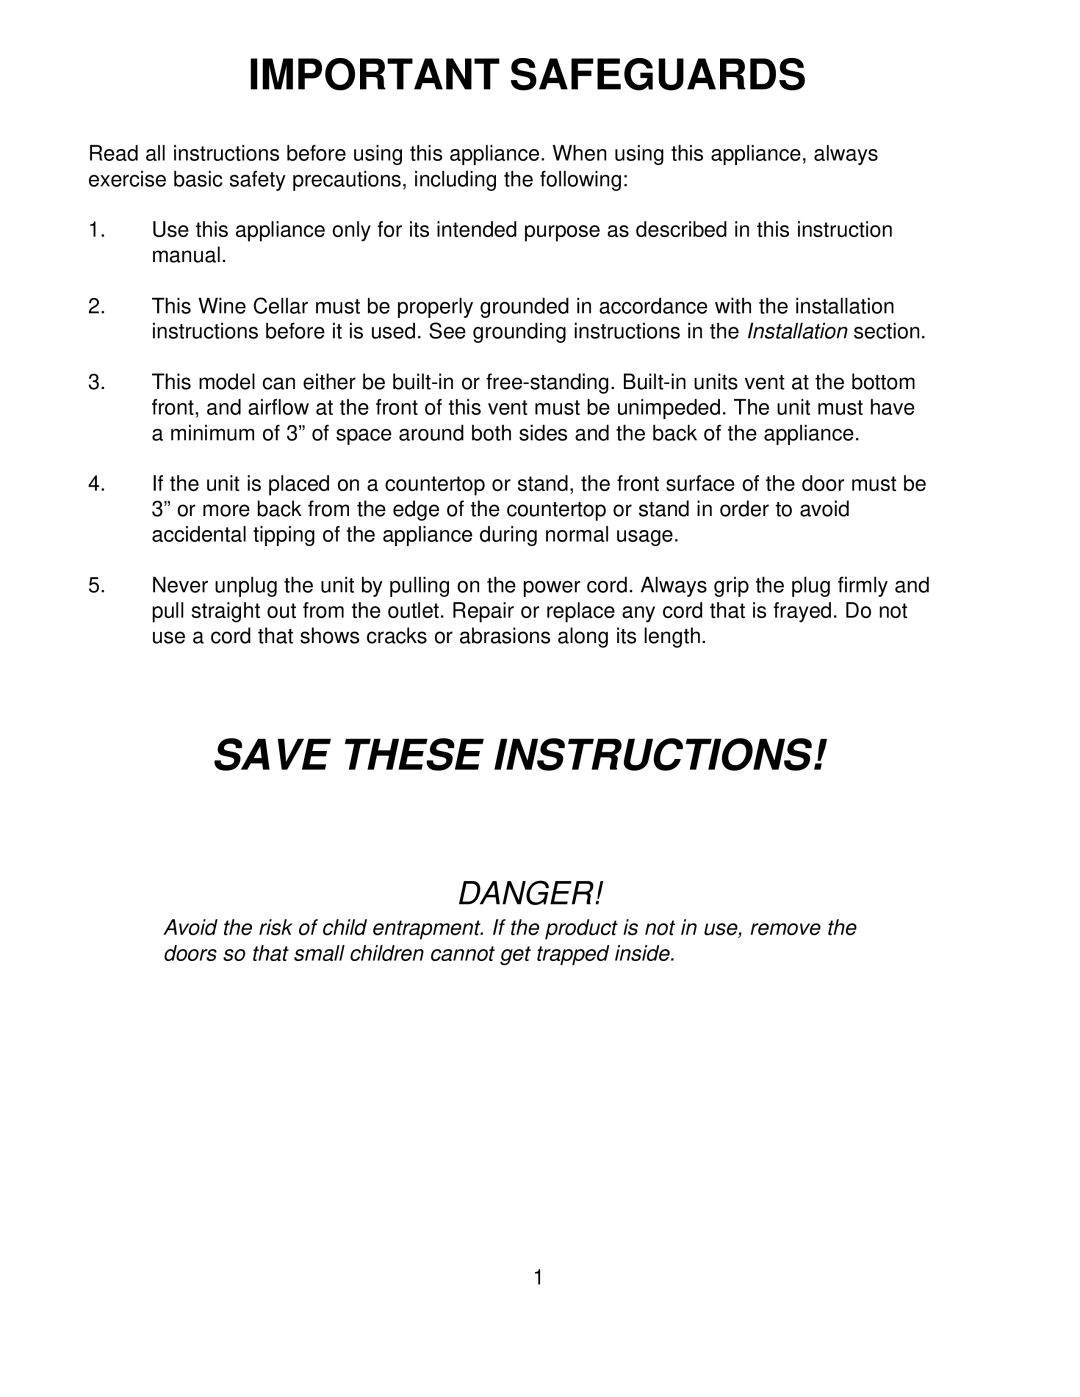 Franklin Industries, L.L.C FCW100 manual Important Safeguards, Danger, Save These Instructions 